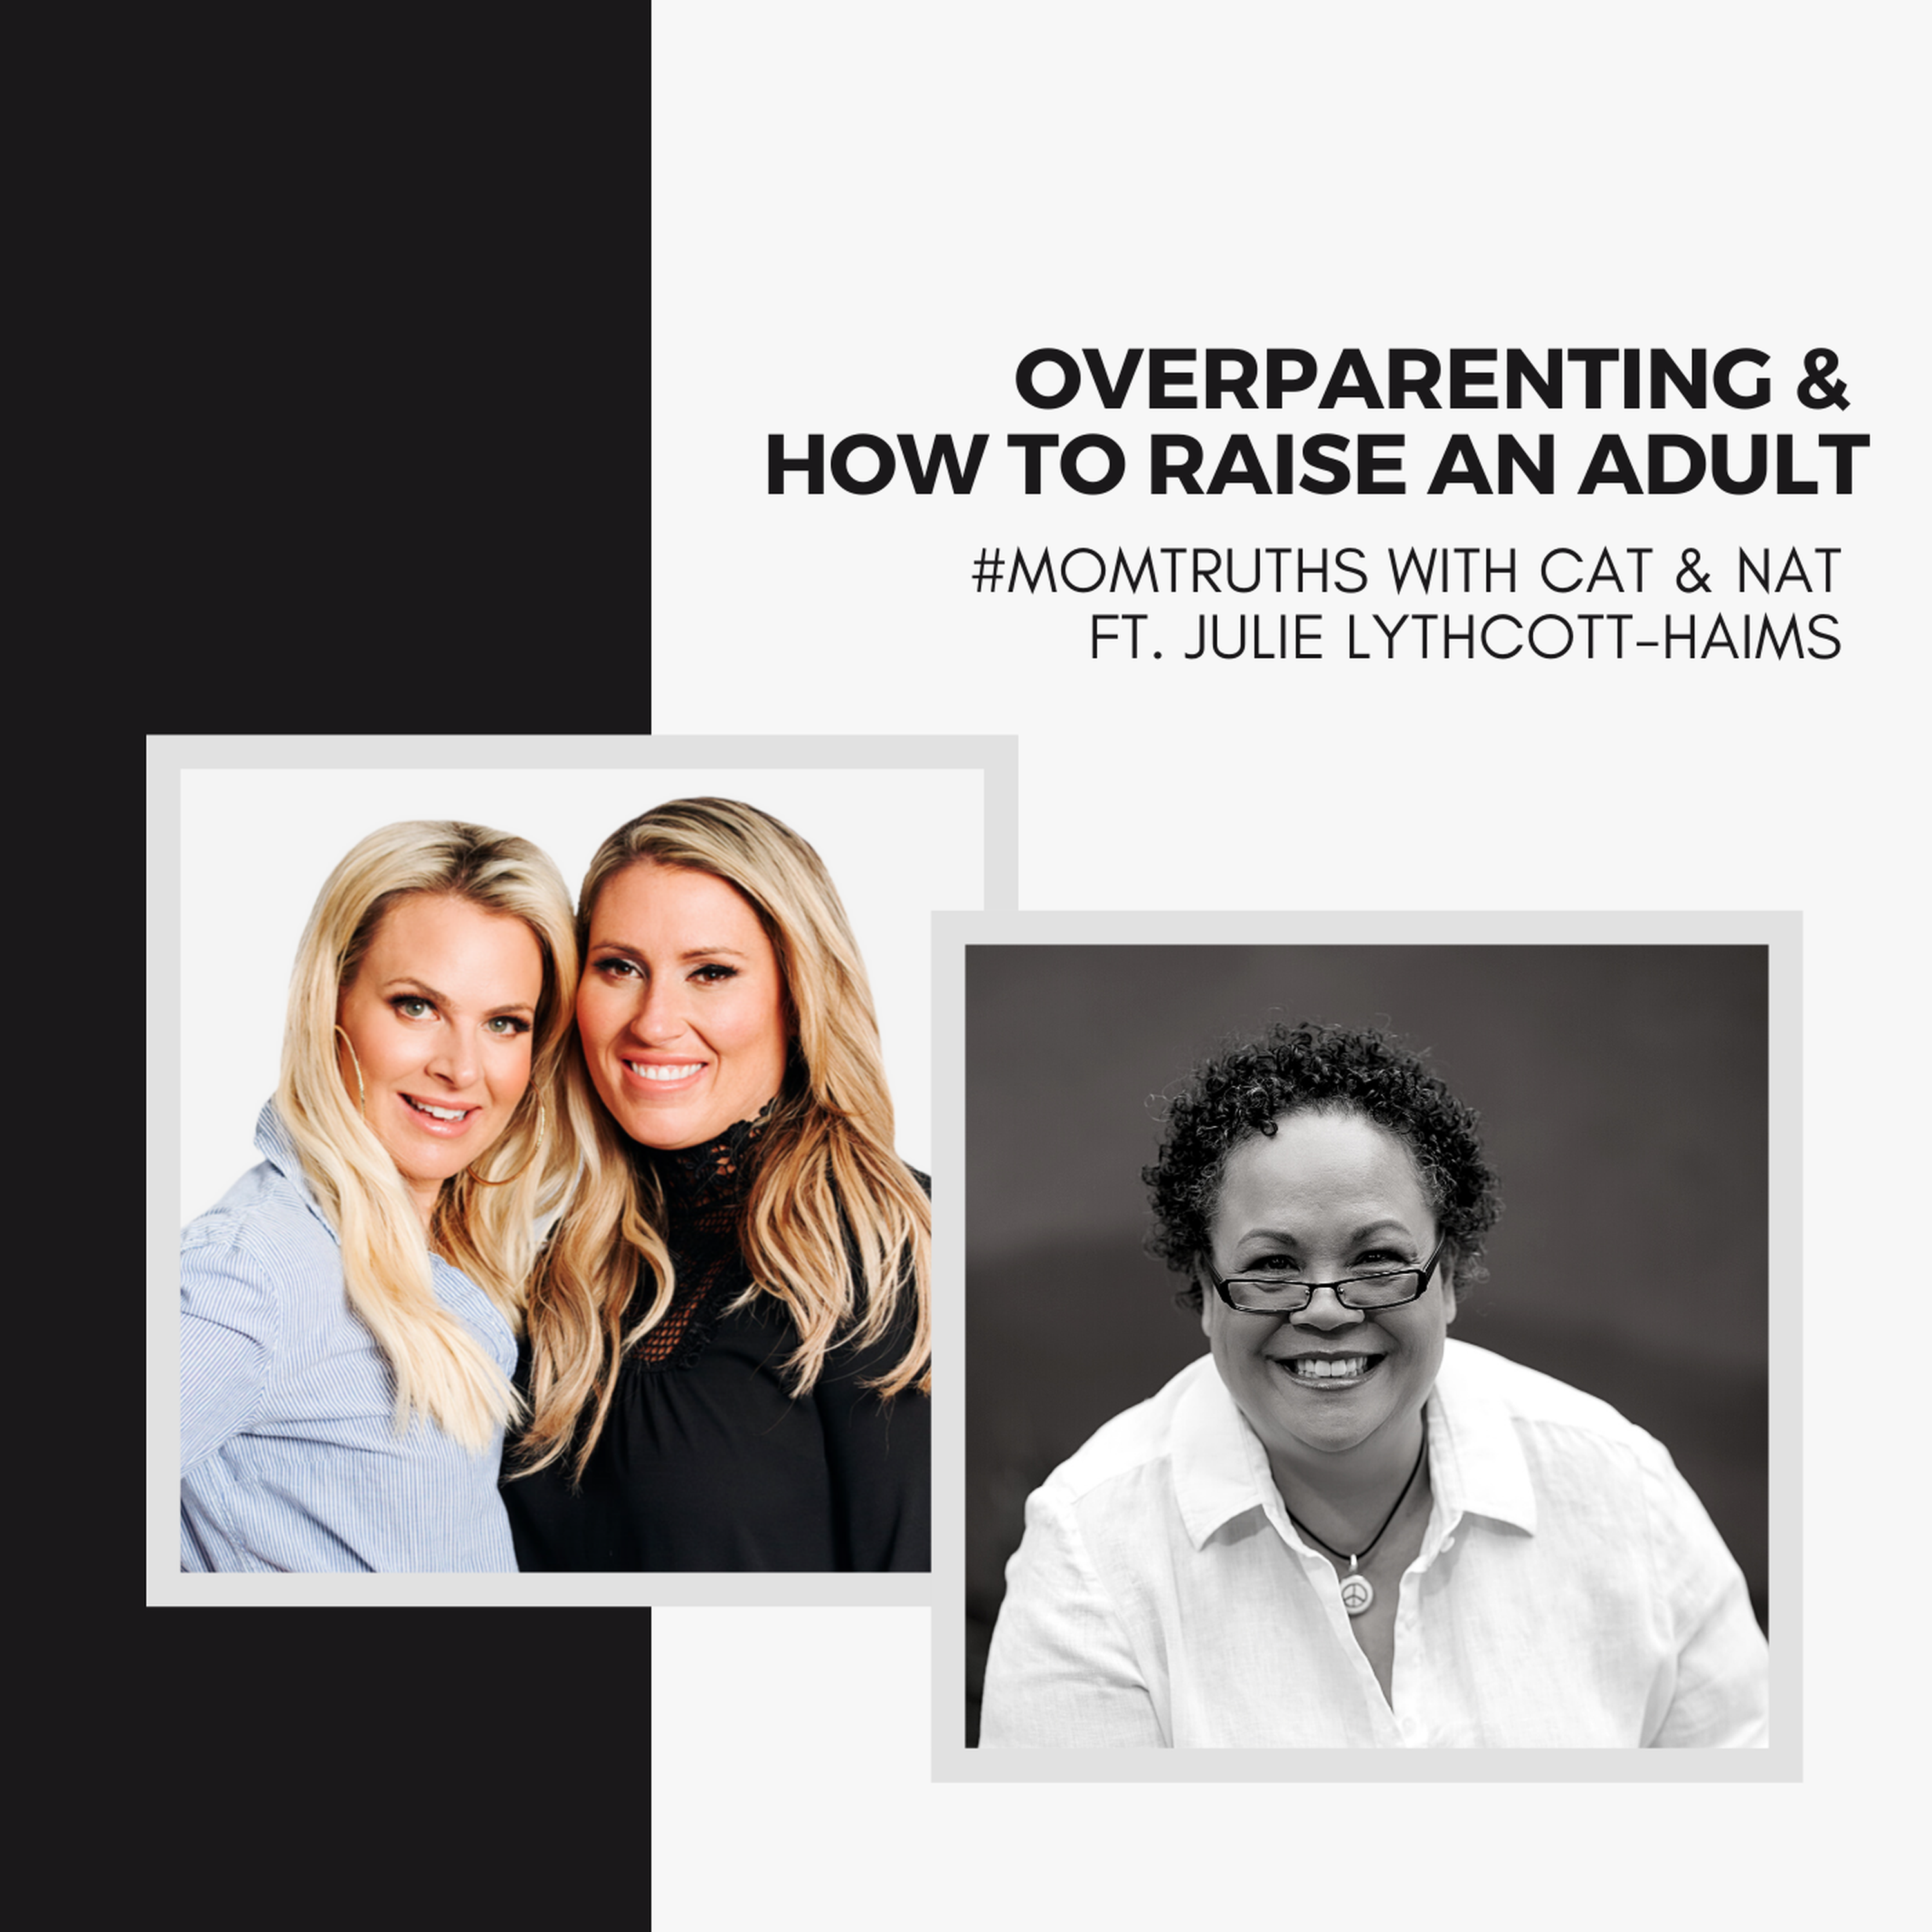 Overparenting & How to Raise an Adult with Julie Lythcott-Haims